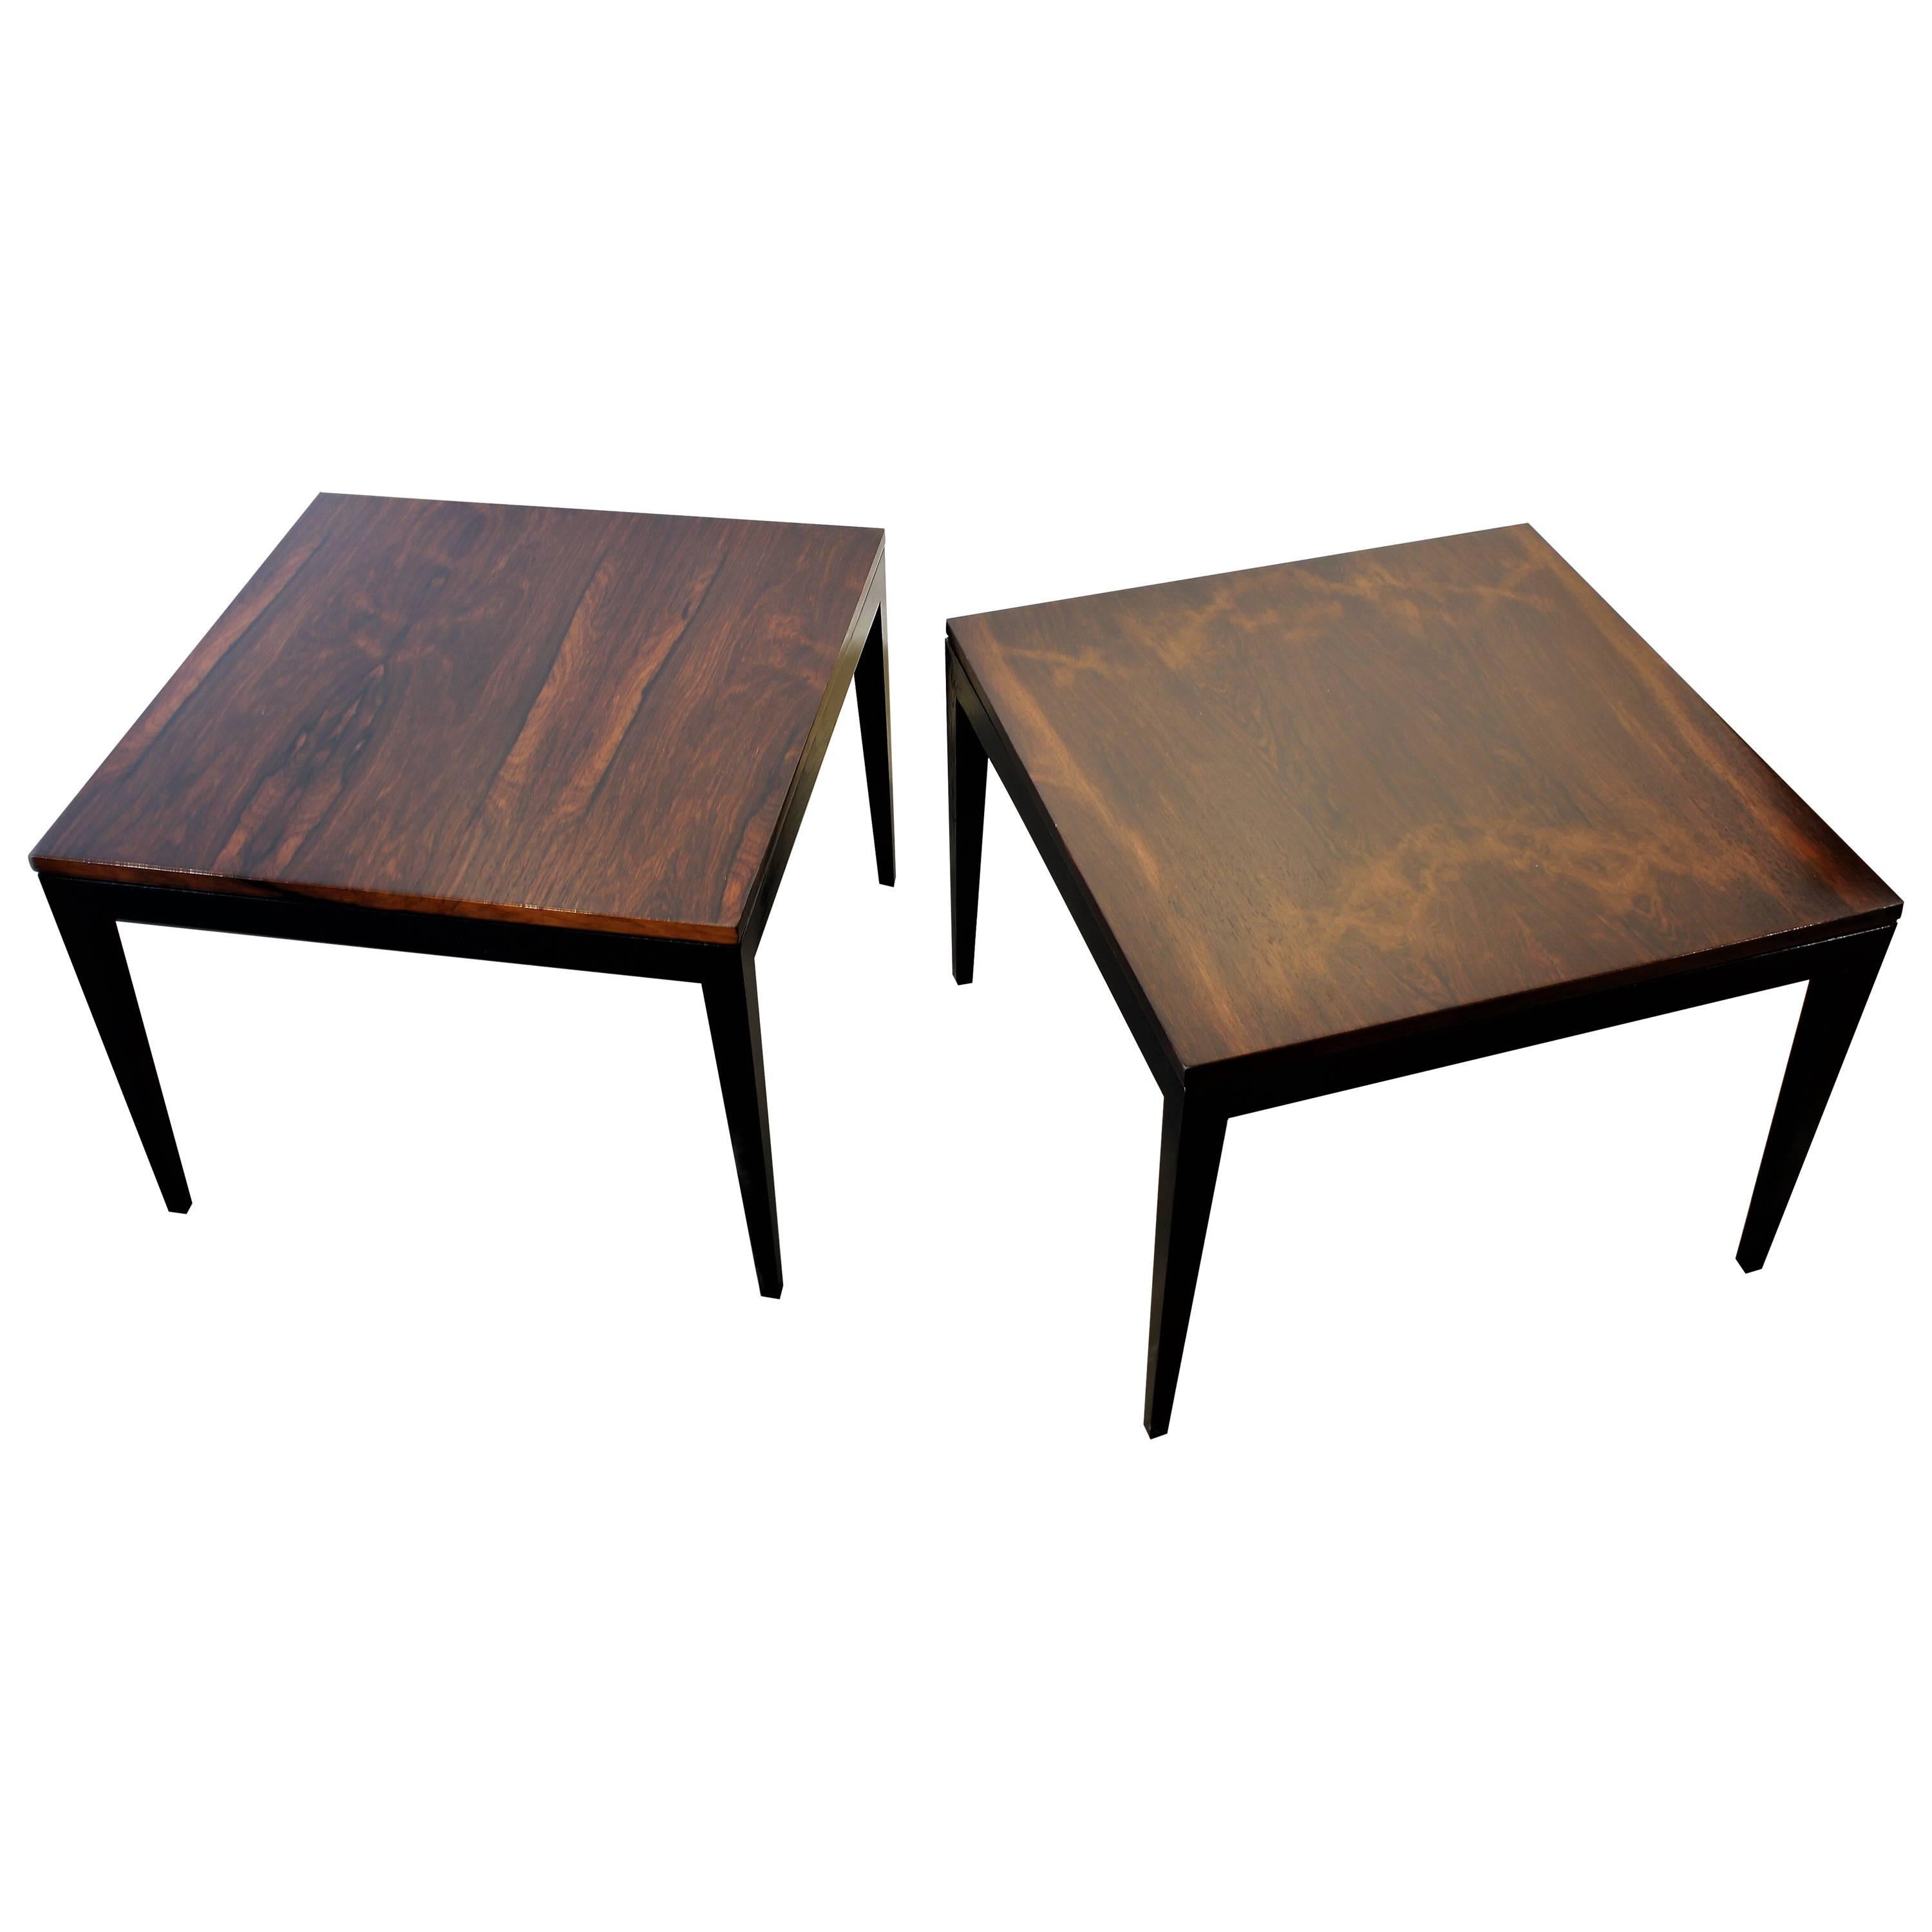 Large beautiful rosewood and ebonized end tables by Harvey Probber, 1960s. Tables have great scale. Rosewood grain on both tables is unique and vibrant. 

Refine Limited is a curated collection of Mid-Century, deco, Danish modern, and decorative